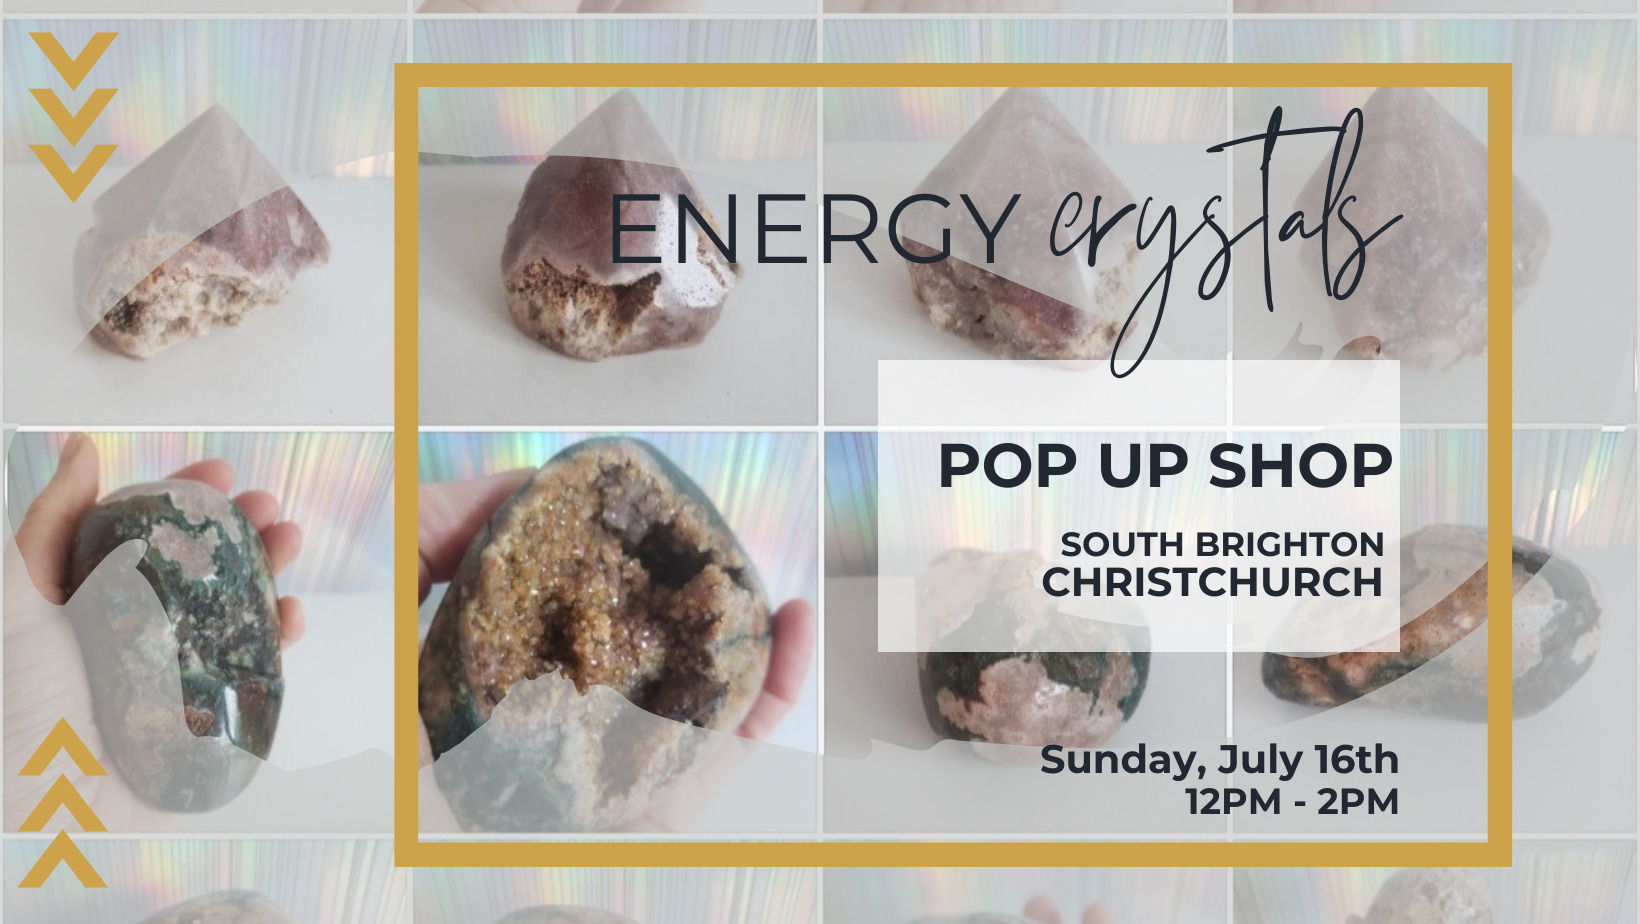 Energy Crystals Pop Up Post (Facebook Cover)